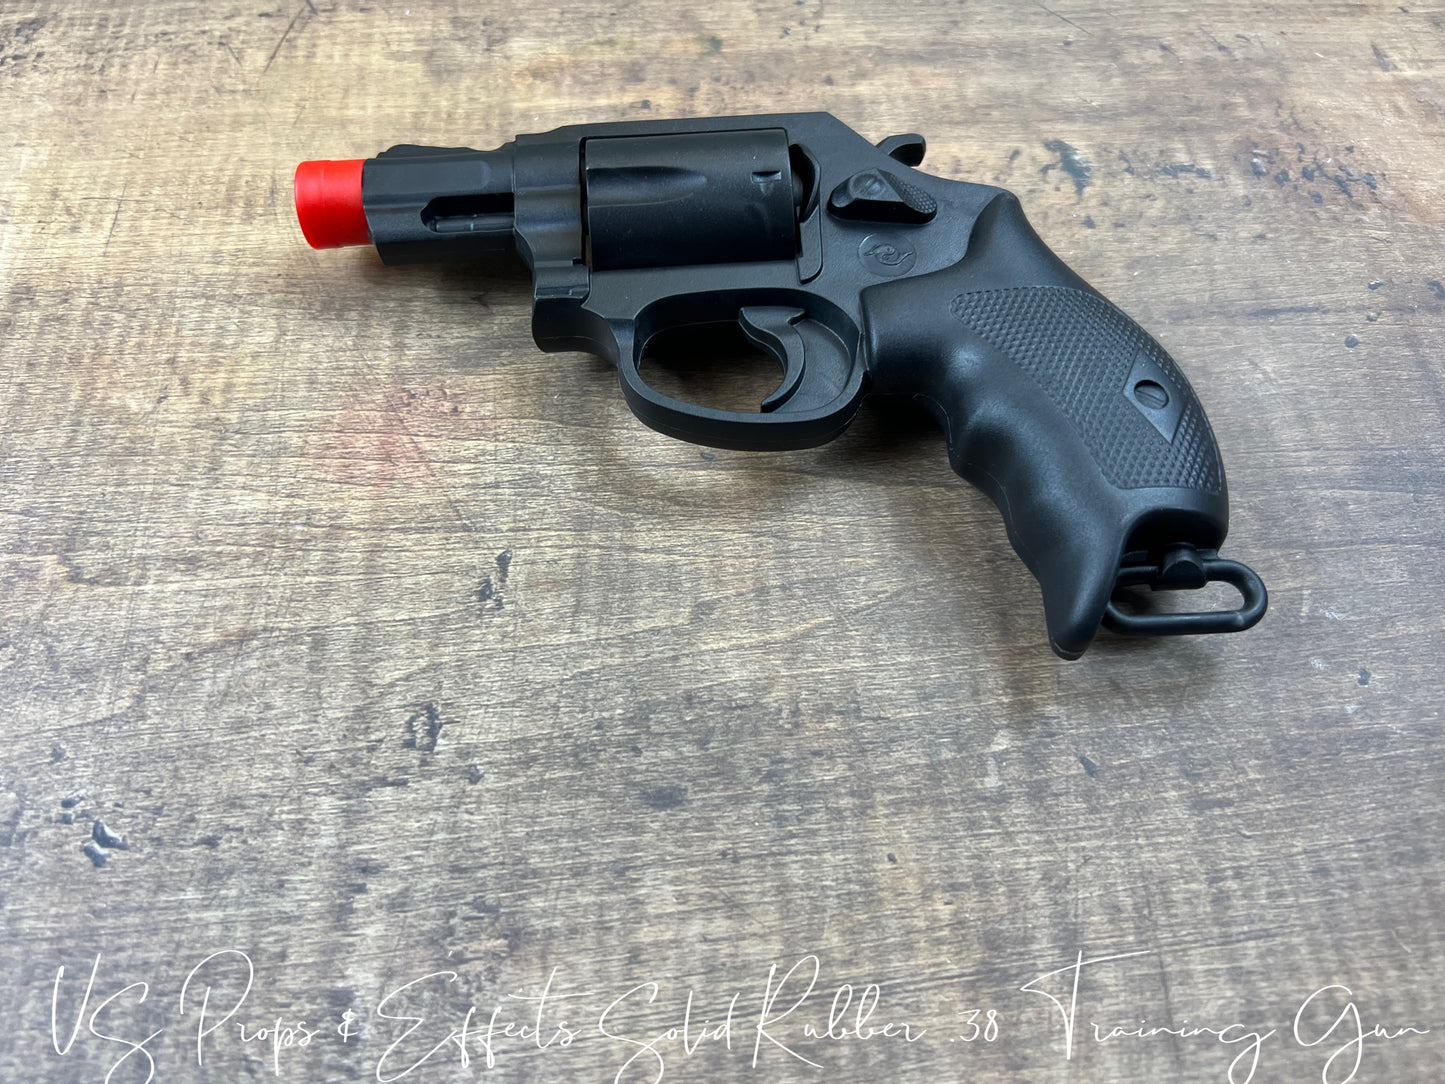 Solid Rubber Training Gun .38 Snub, SAFE SET CHOICE, No Projectiles, Film & Tv Safe, Theatre Safe, Gun Safety for Filming